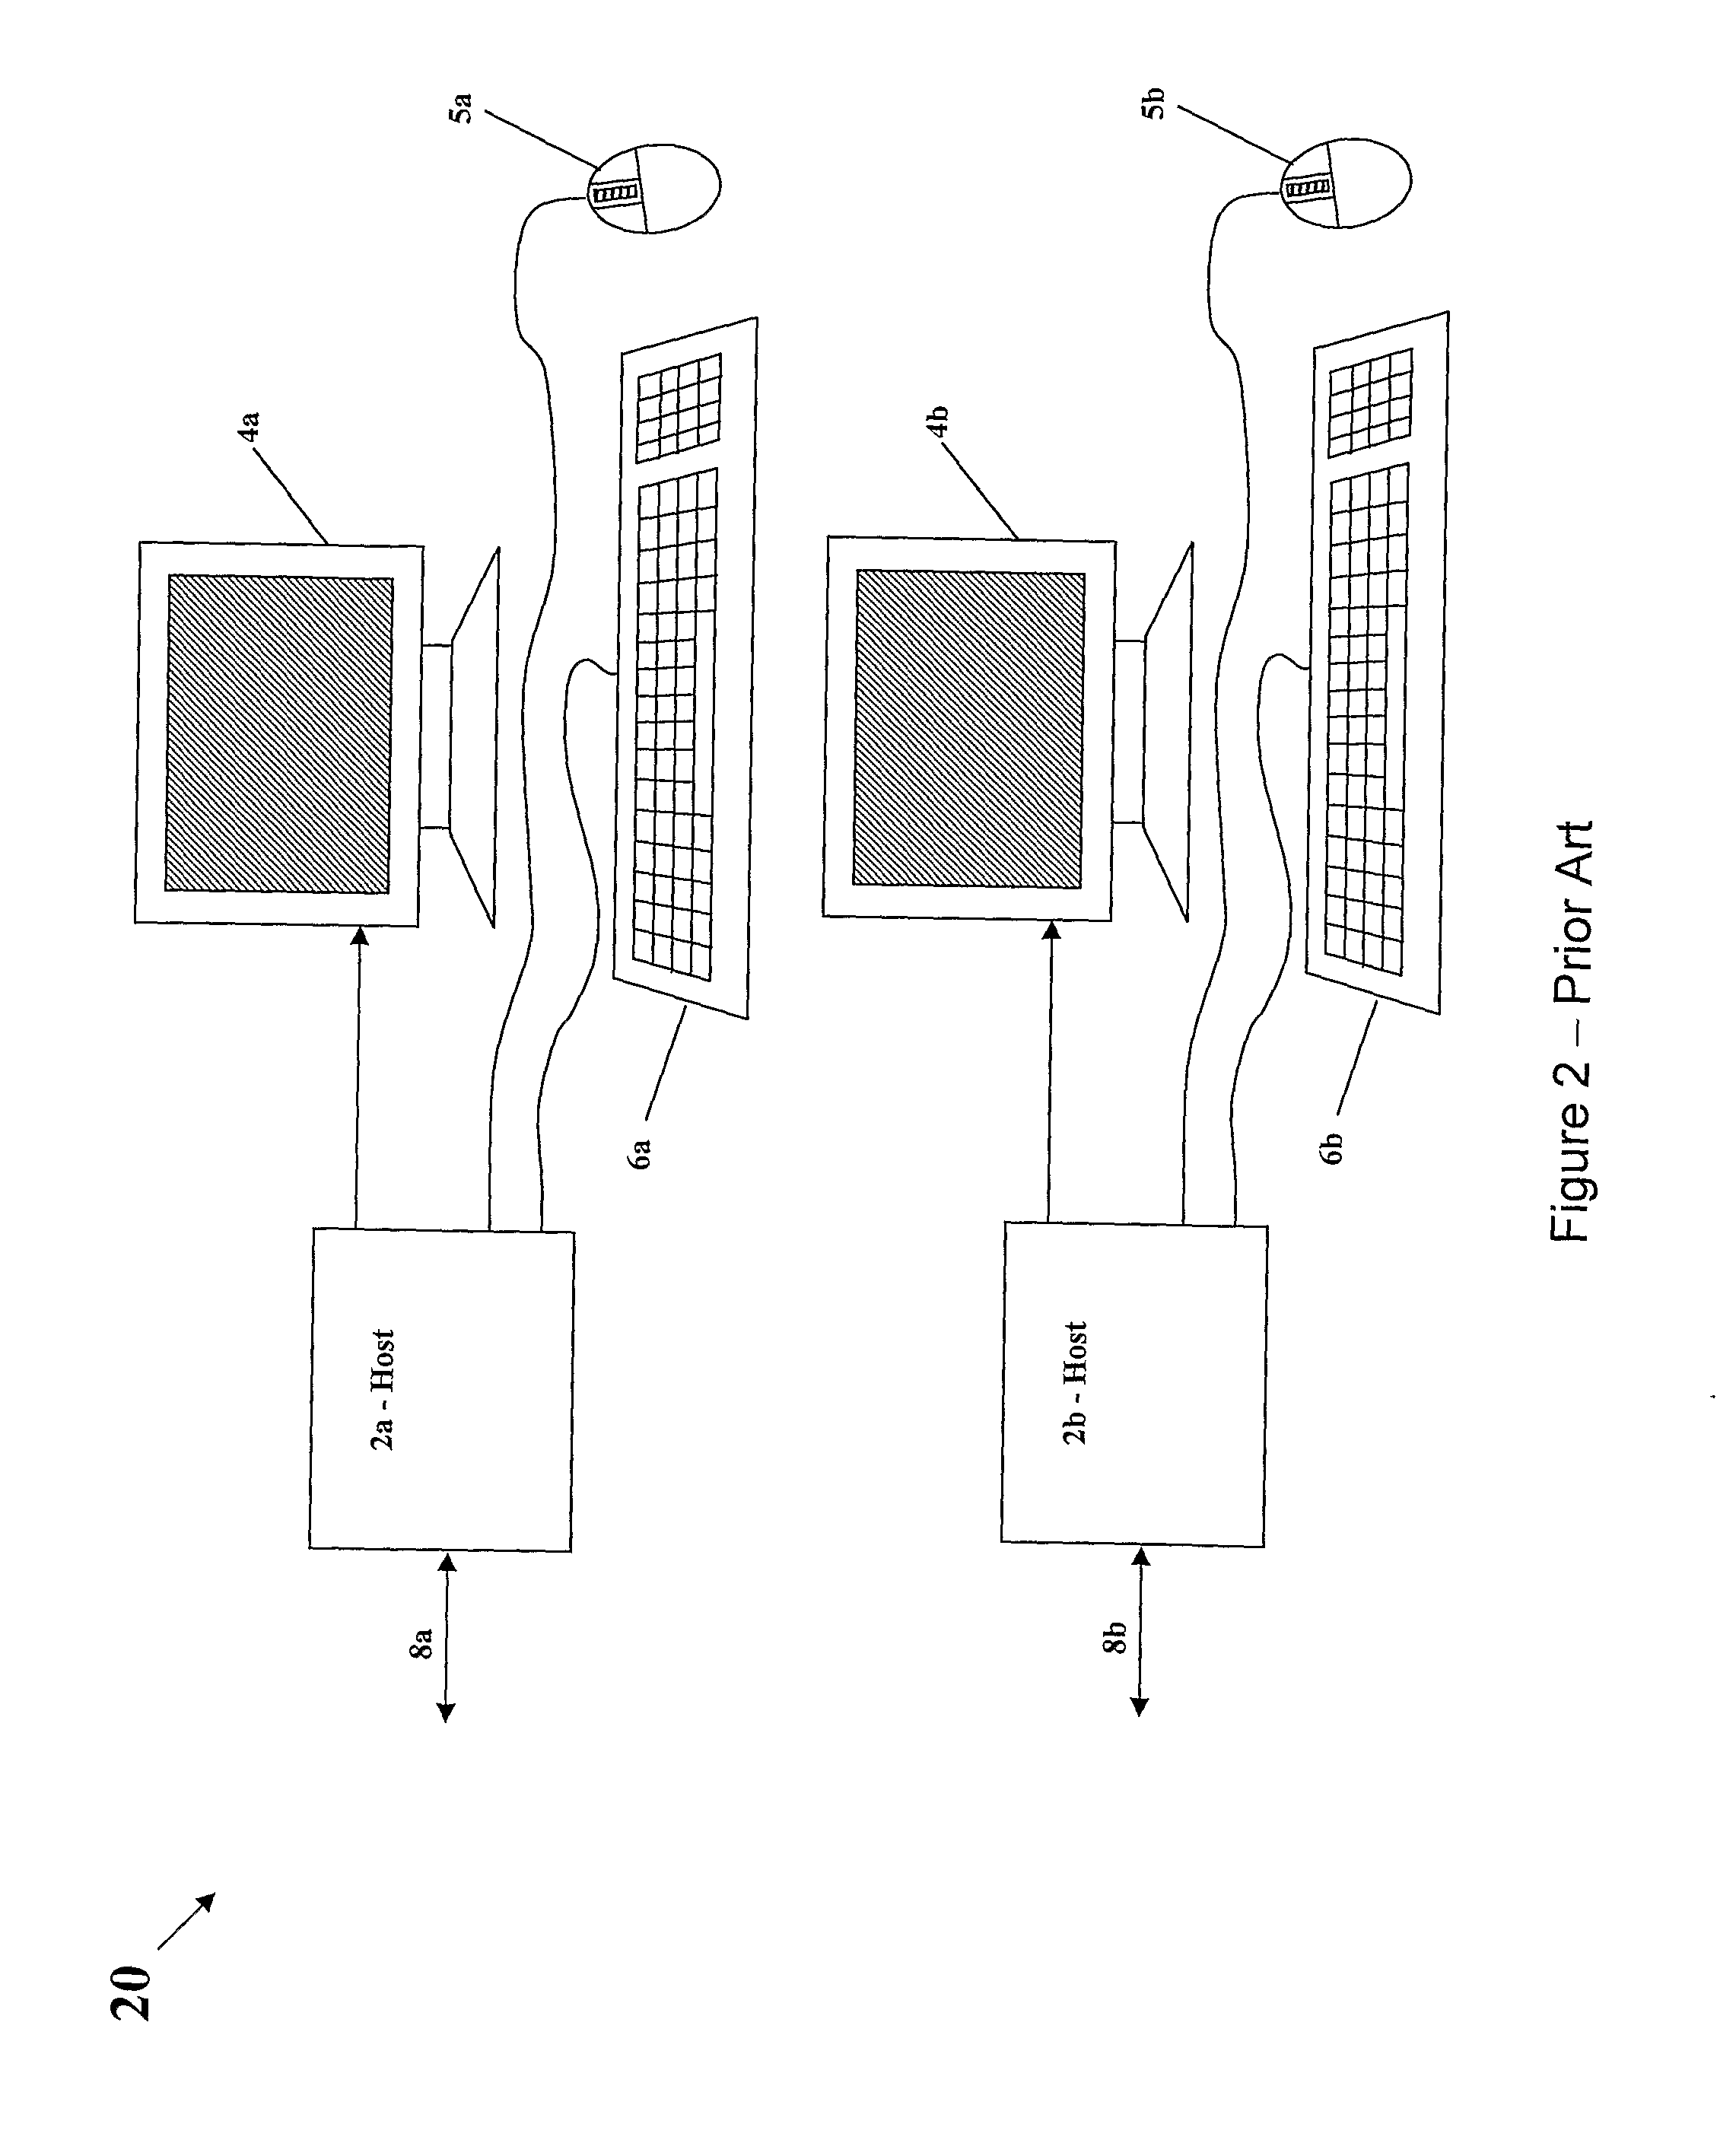 Isolated multi-network computer system and apparatus